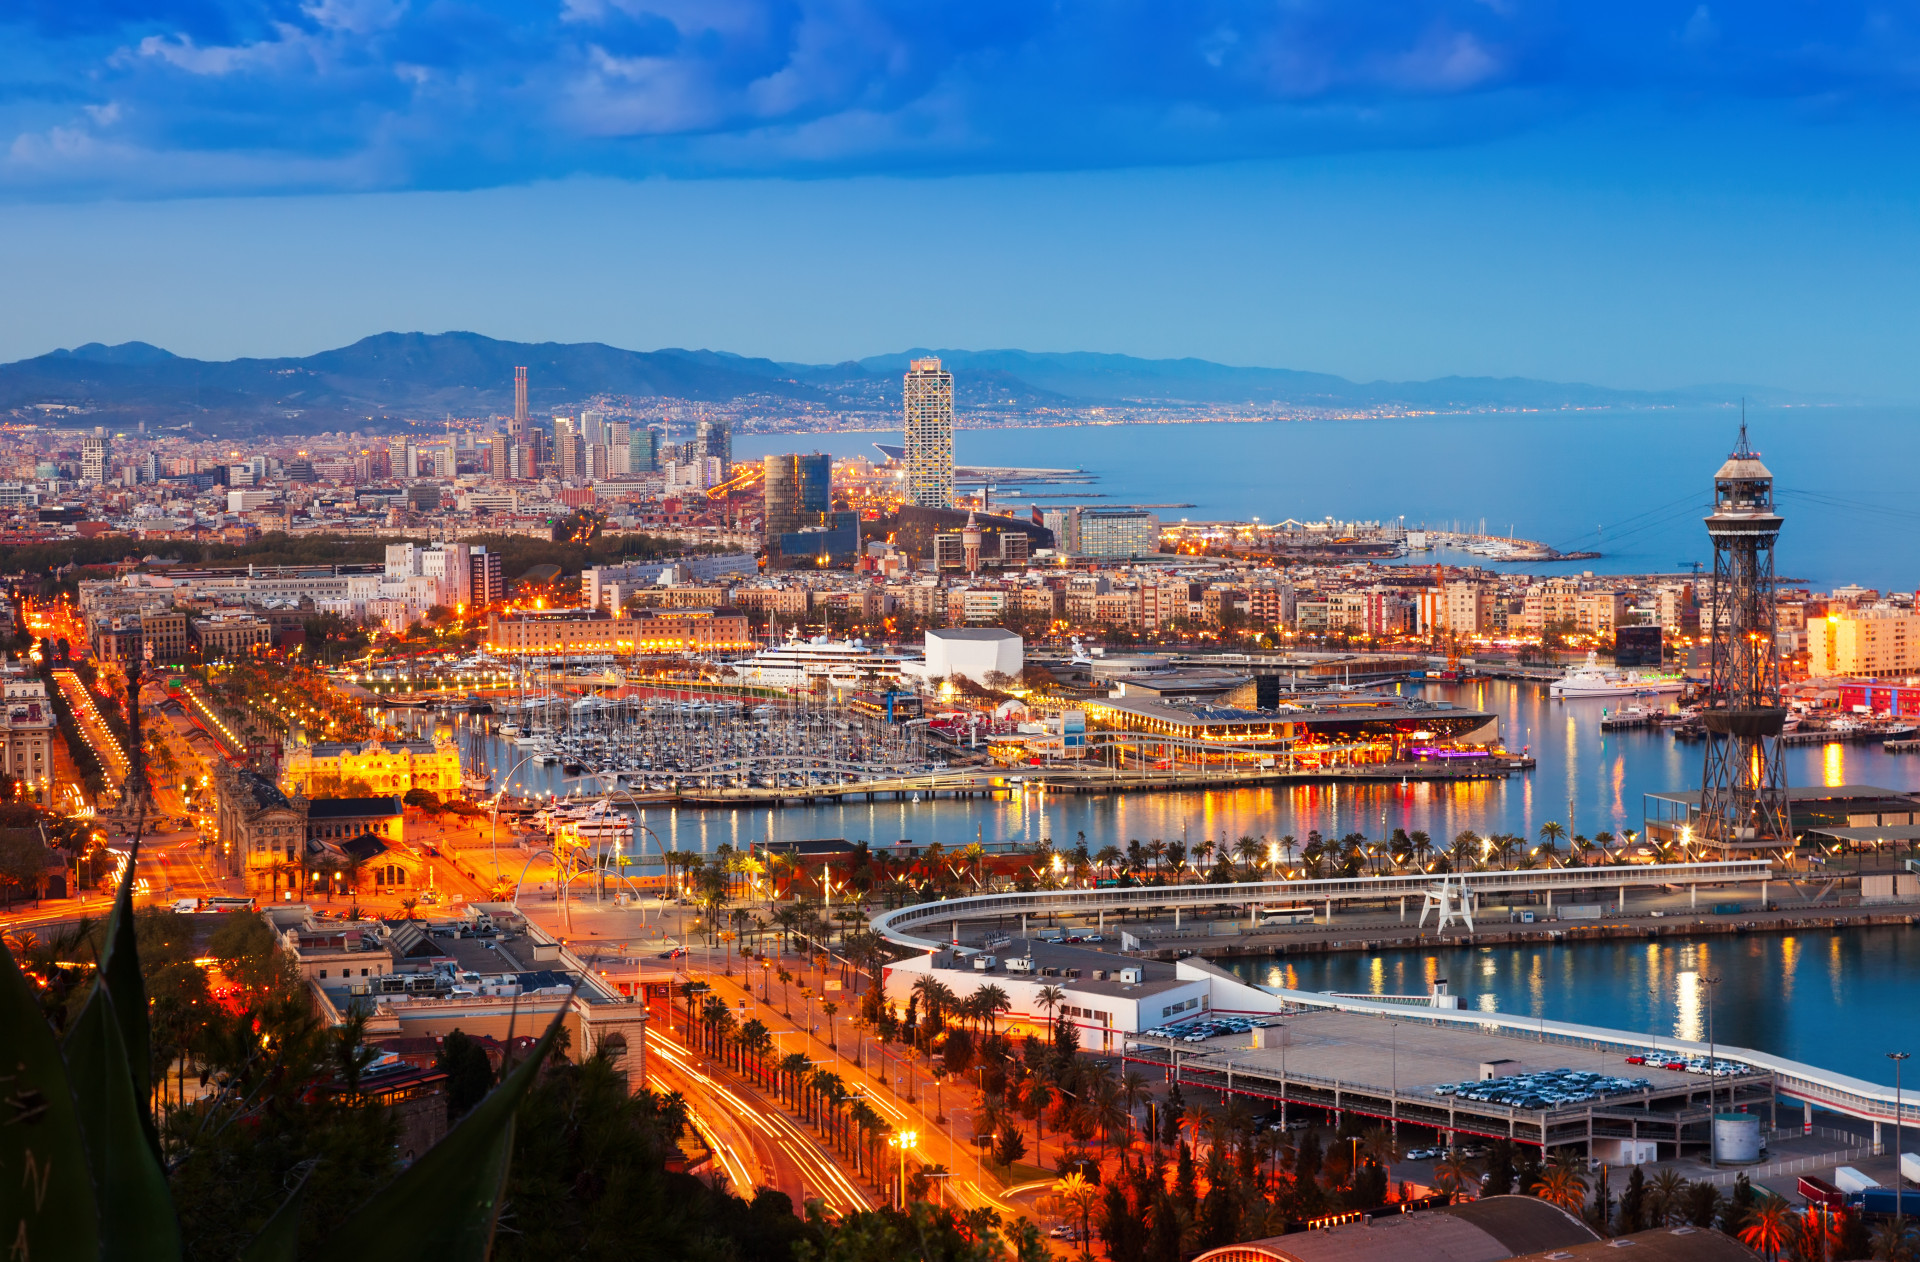 The capital of the autonomous region of Catalonia is one of Spain's most important tourist destinations. It's also incredibly important both culturally and commercially.<p>You may also like:<a href="https://www.starsinsider.com/n/476861?utm_source=msn.com&utm_medium=display&utm_campaign=referral_description&utm_content=292997v1en-us"> Stars weigh in on the Hollywood bathing debate</a></p>